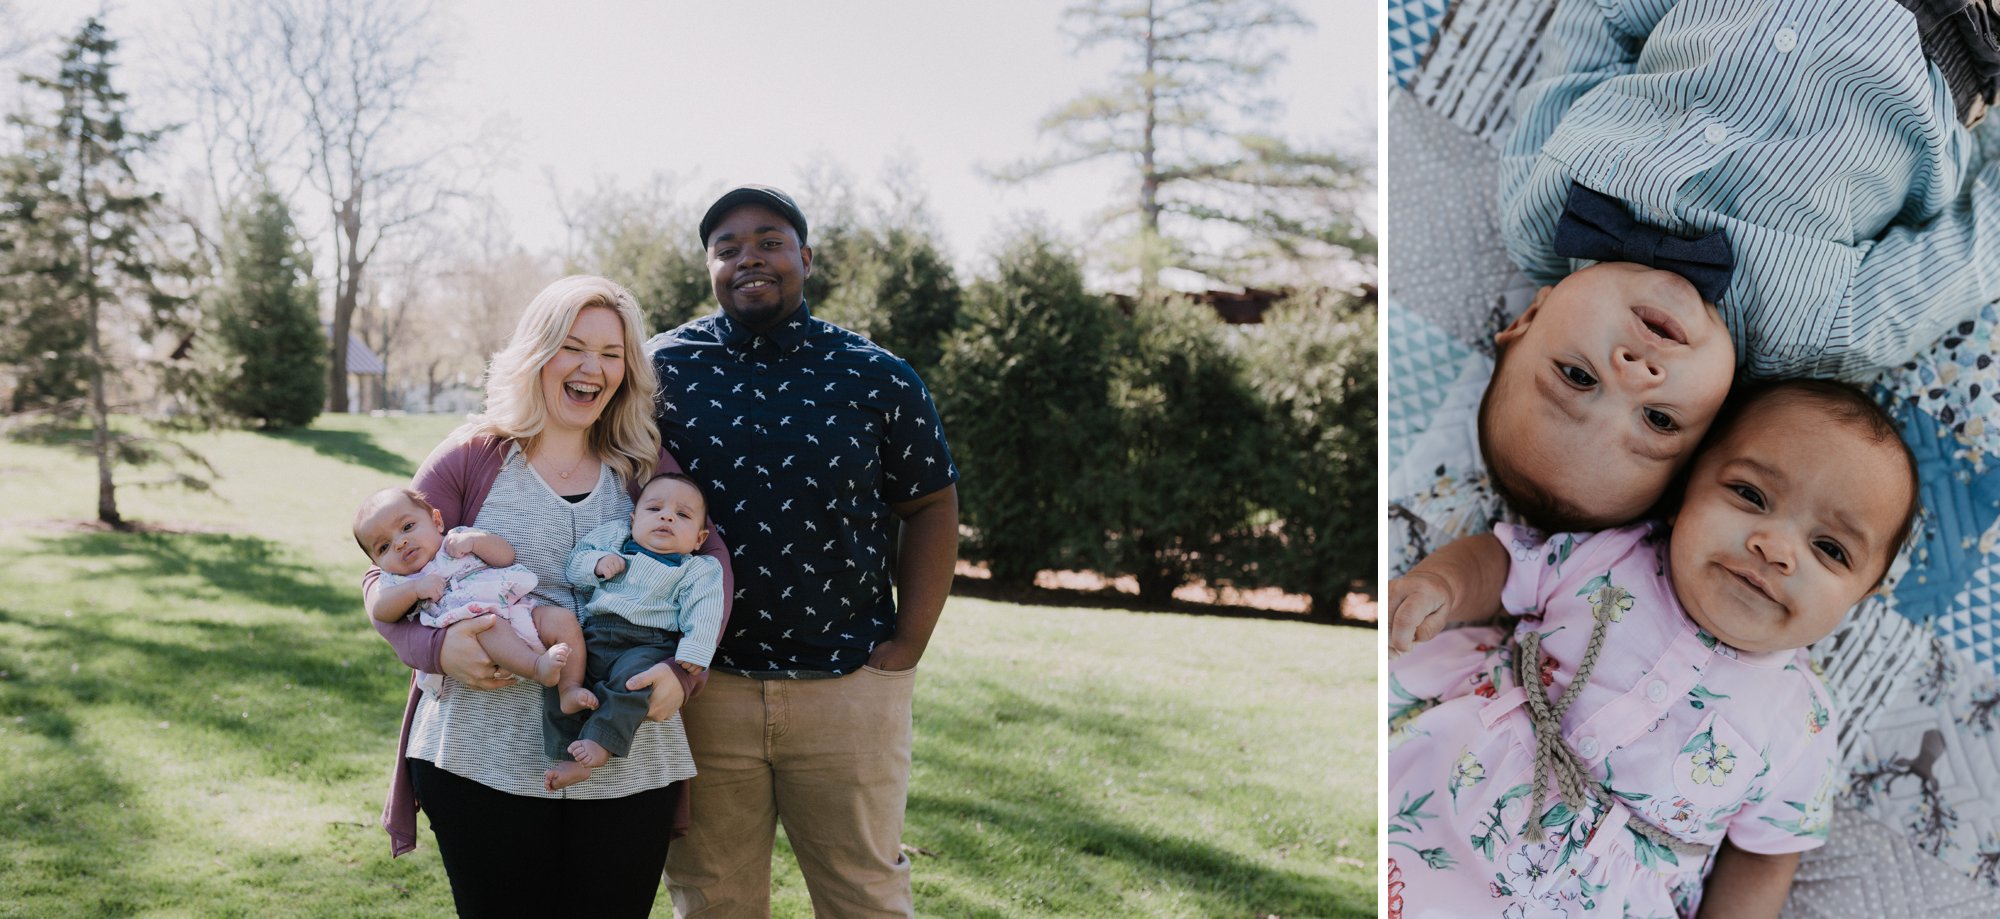 From Maternity to One Year: Getting to Know Quinci and Adali